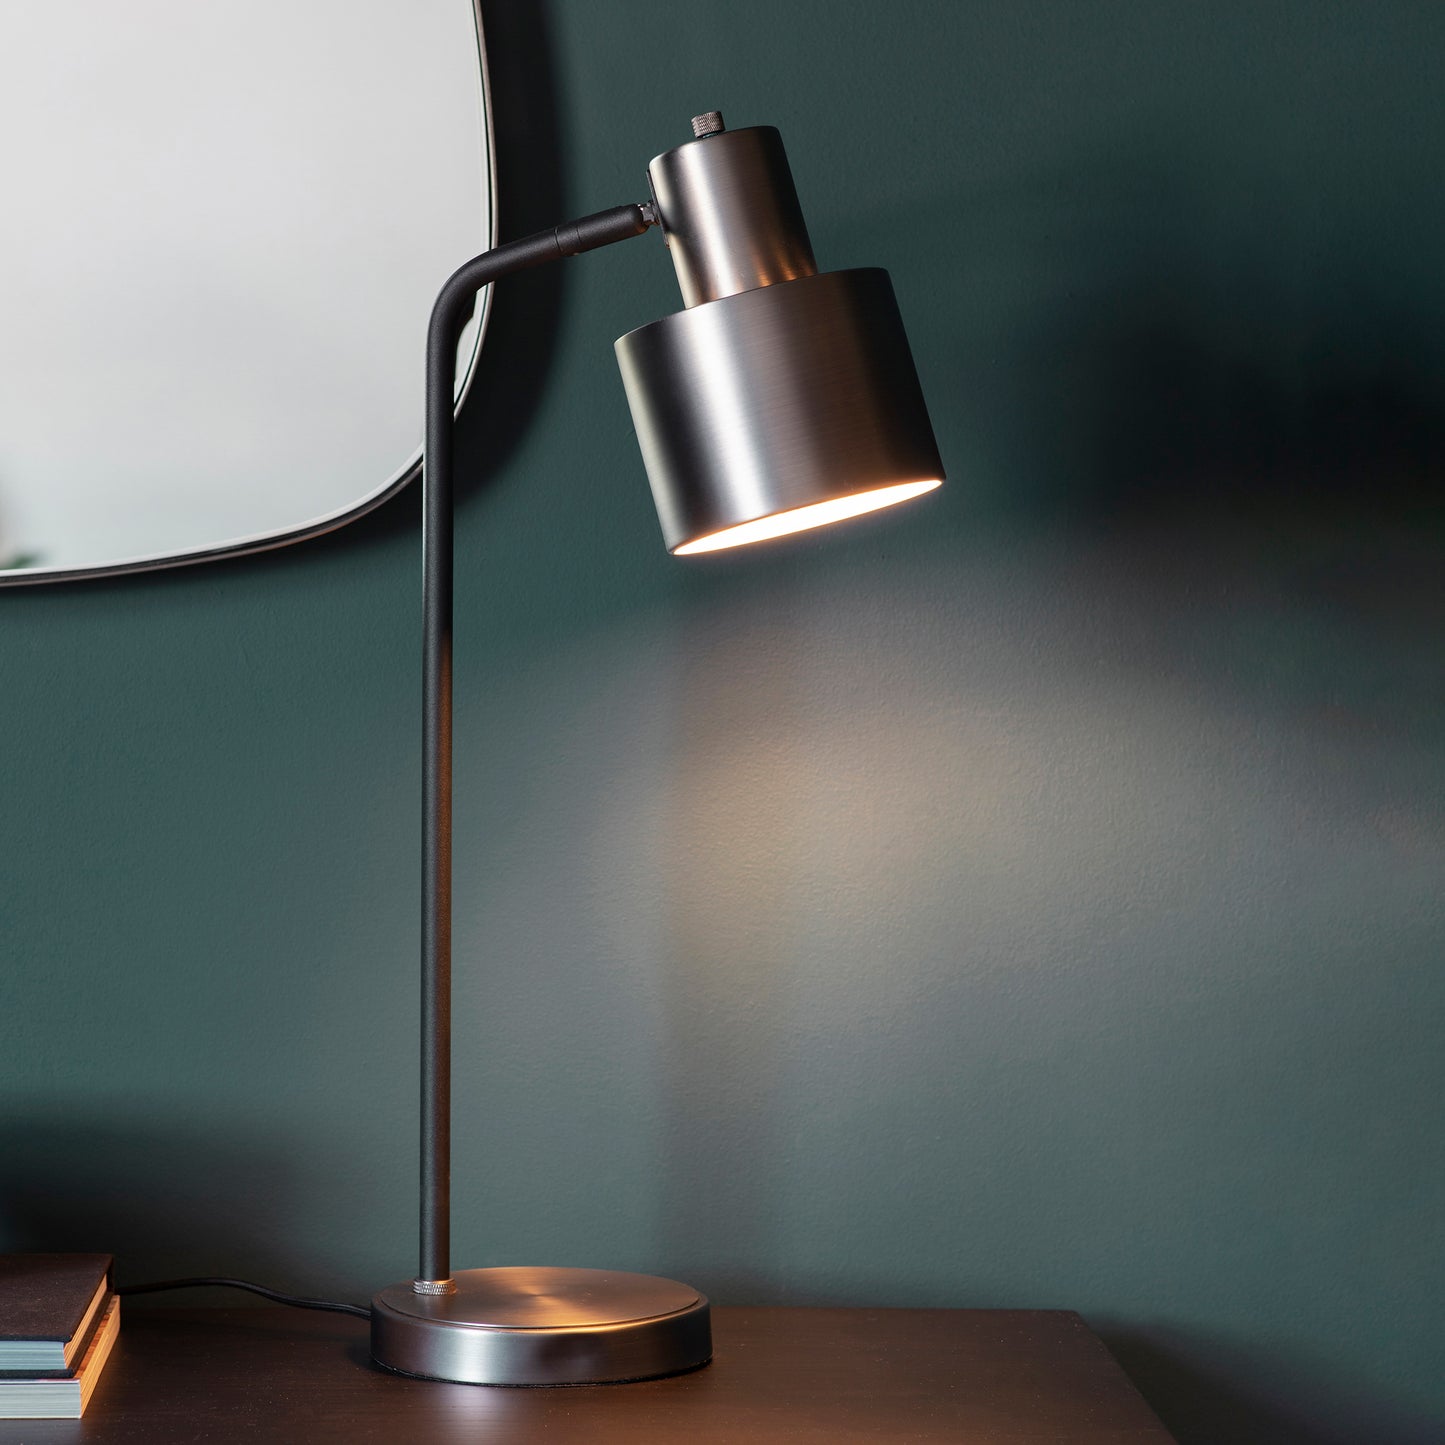 A Mayfield Table Lamp featuring a mirror, perfect for enhancing interior decor.